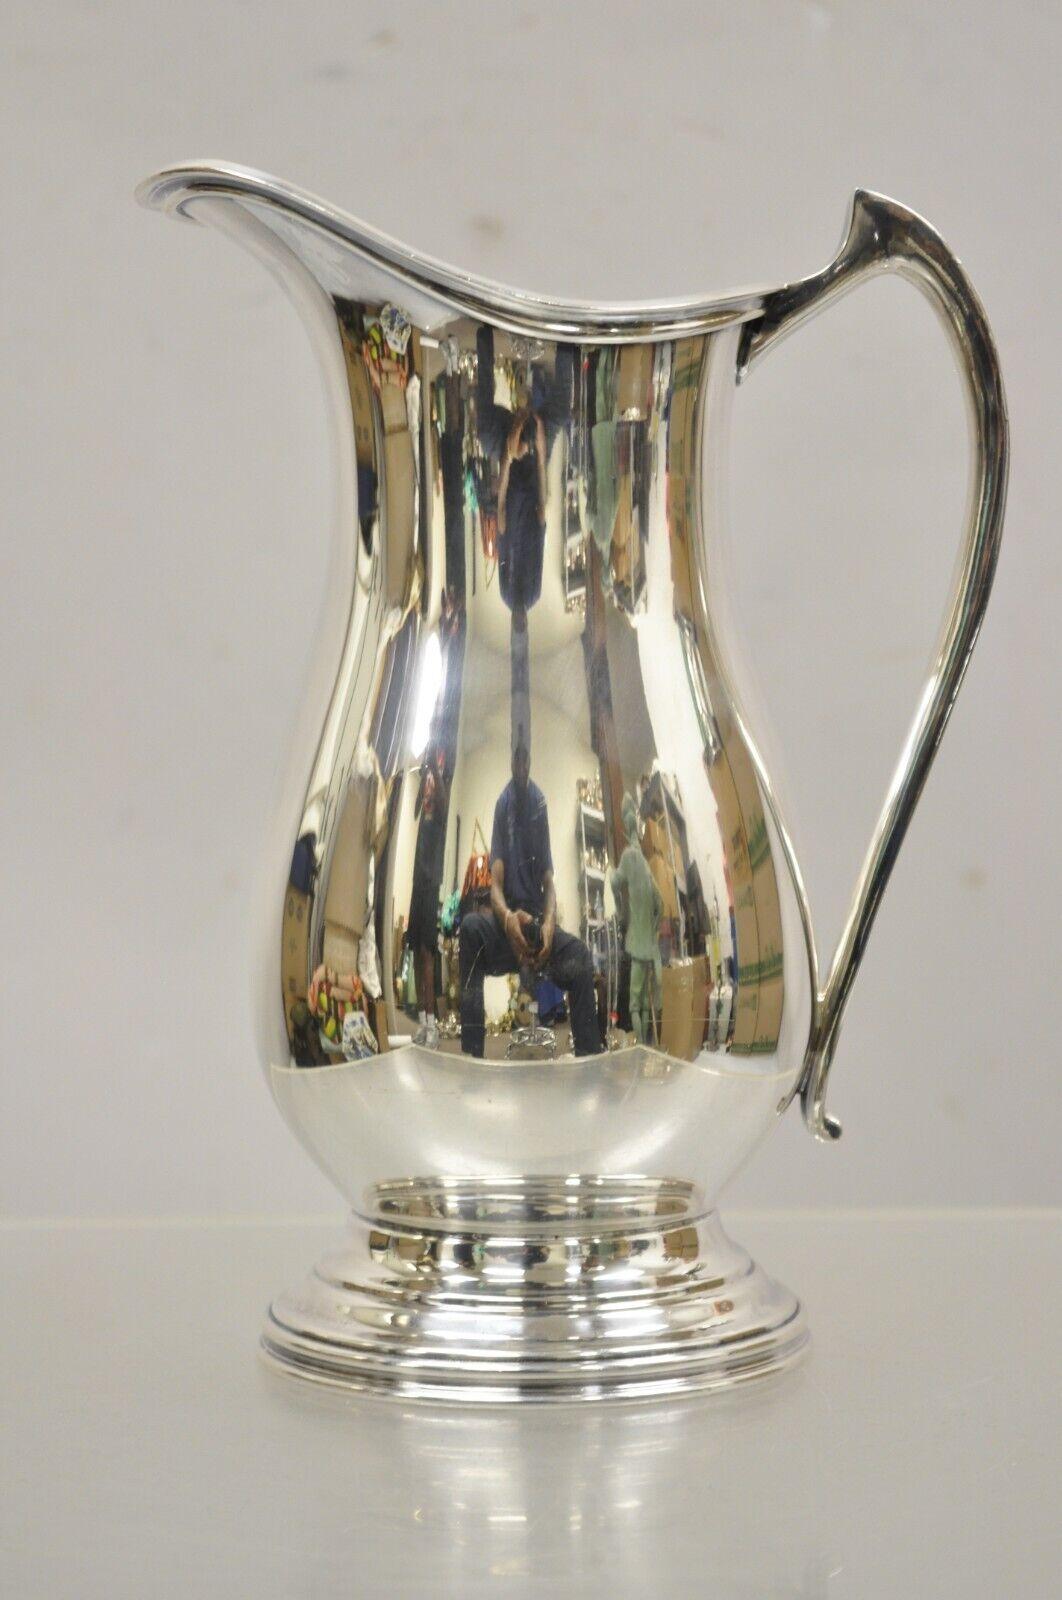 Antique Silver Plated Victorian Water Pitcher By The Sheffield Silver Co. Circa Mid 20th century. Measurements: 10